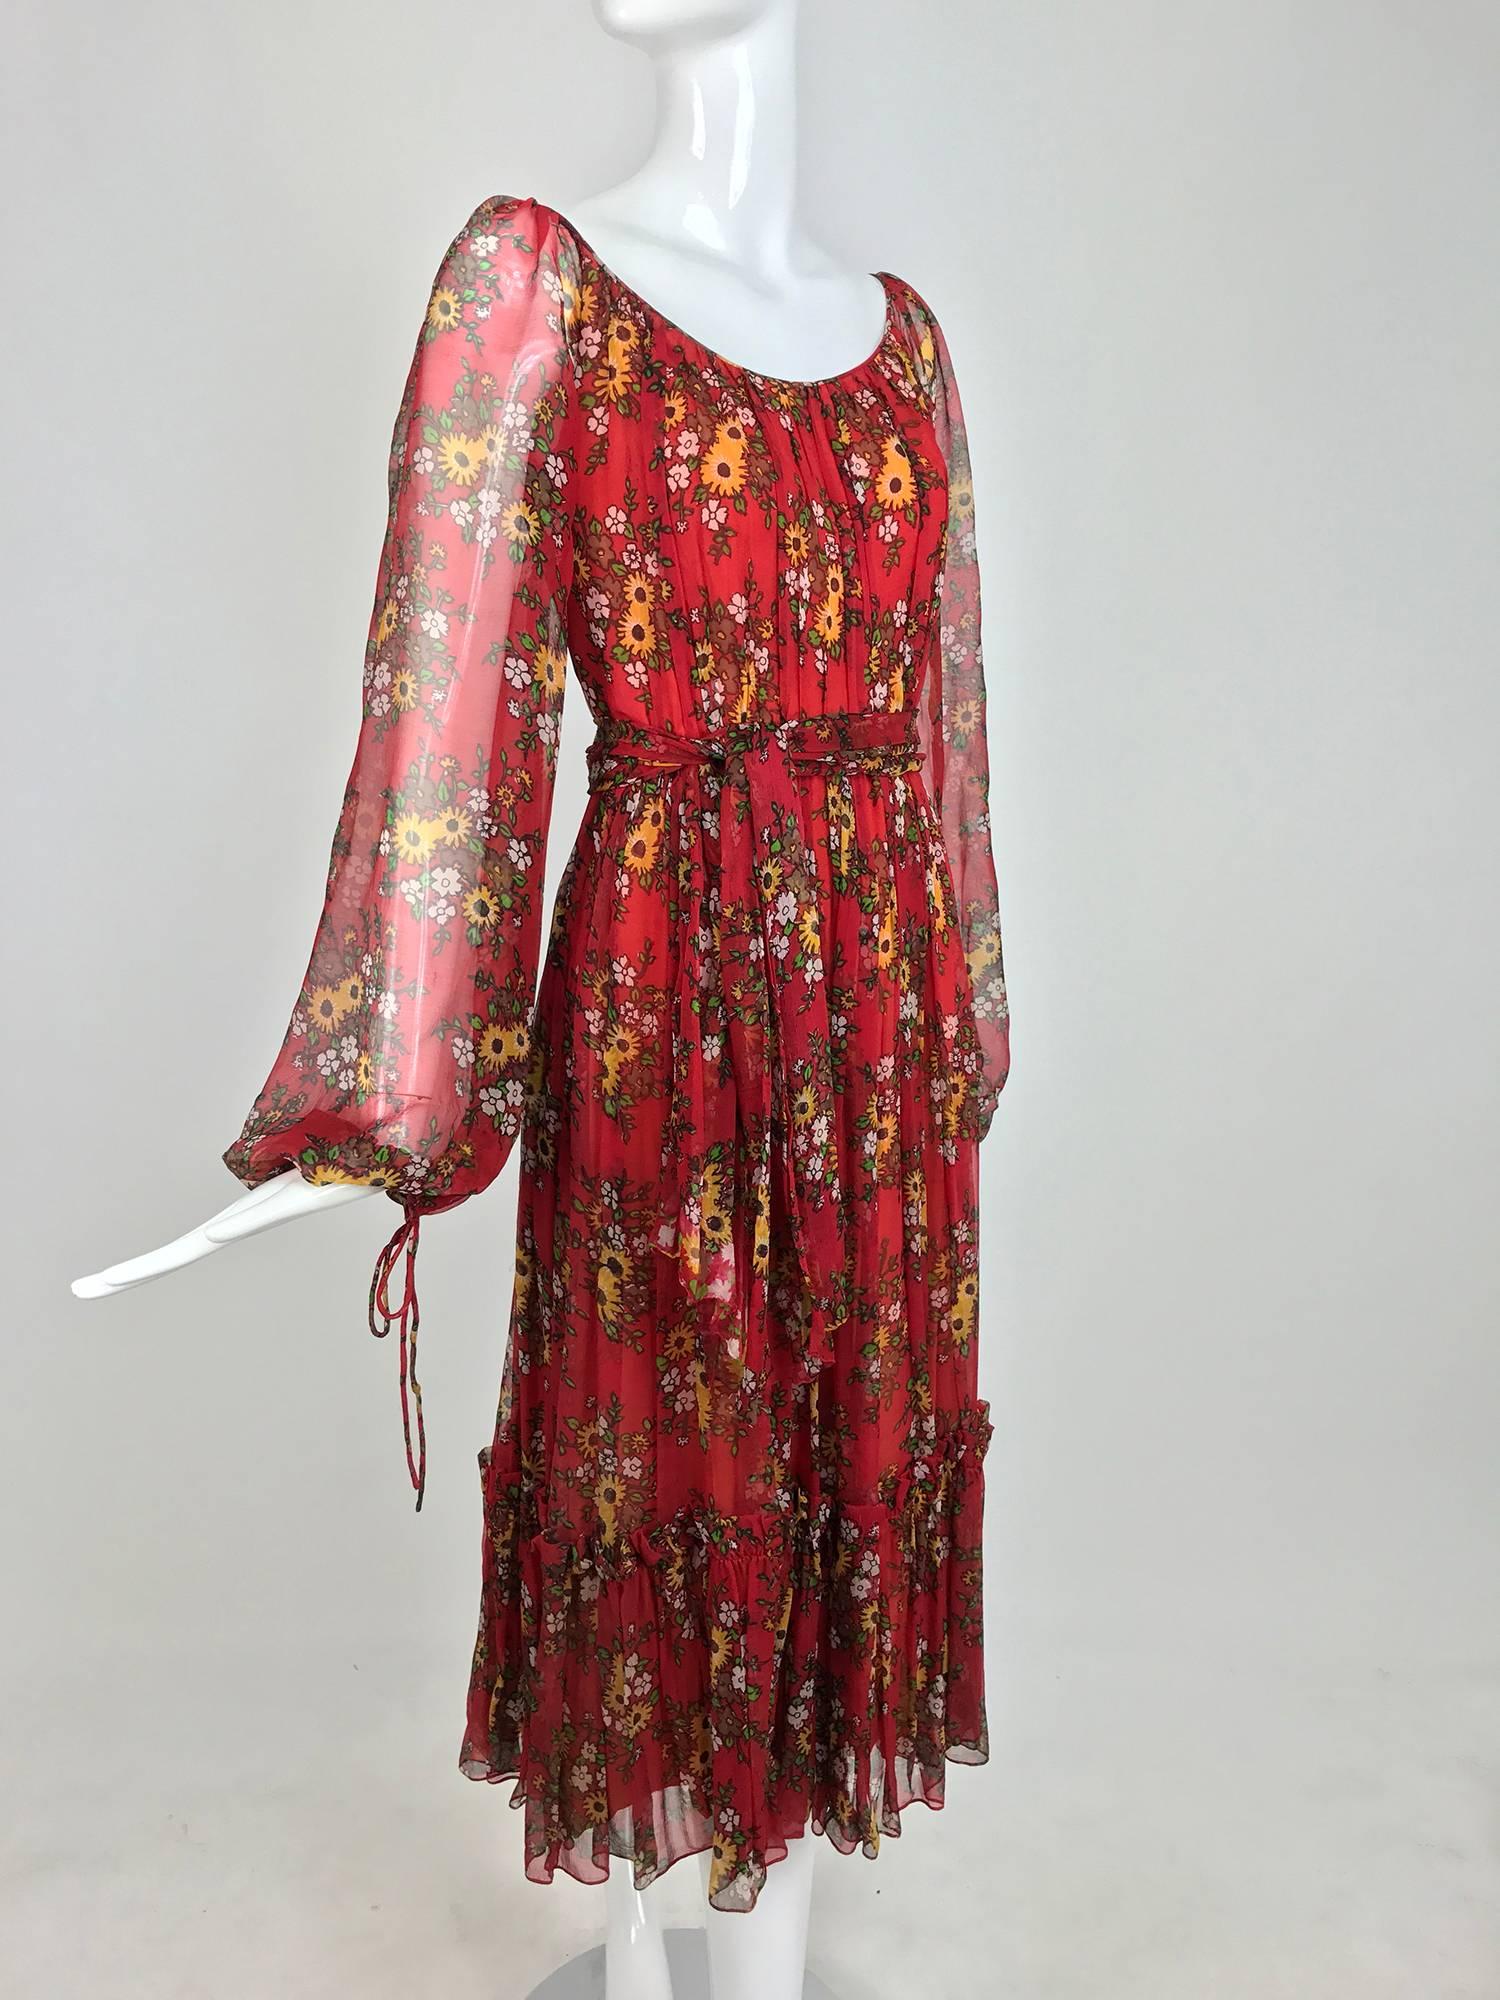 Bohemian style peasant dress from the 1970s, labeled House of Arts. Sheer silk in dark red with a floral print, scoop neckline, raglan sleeves with tie cuffs. Full gathered skirt with a deep ruffle hemline. Together with the original self tie sash.